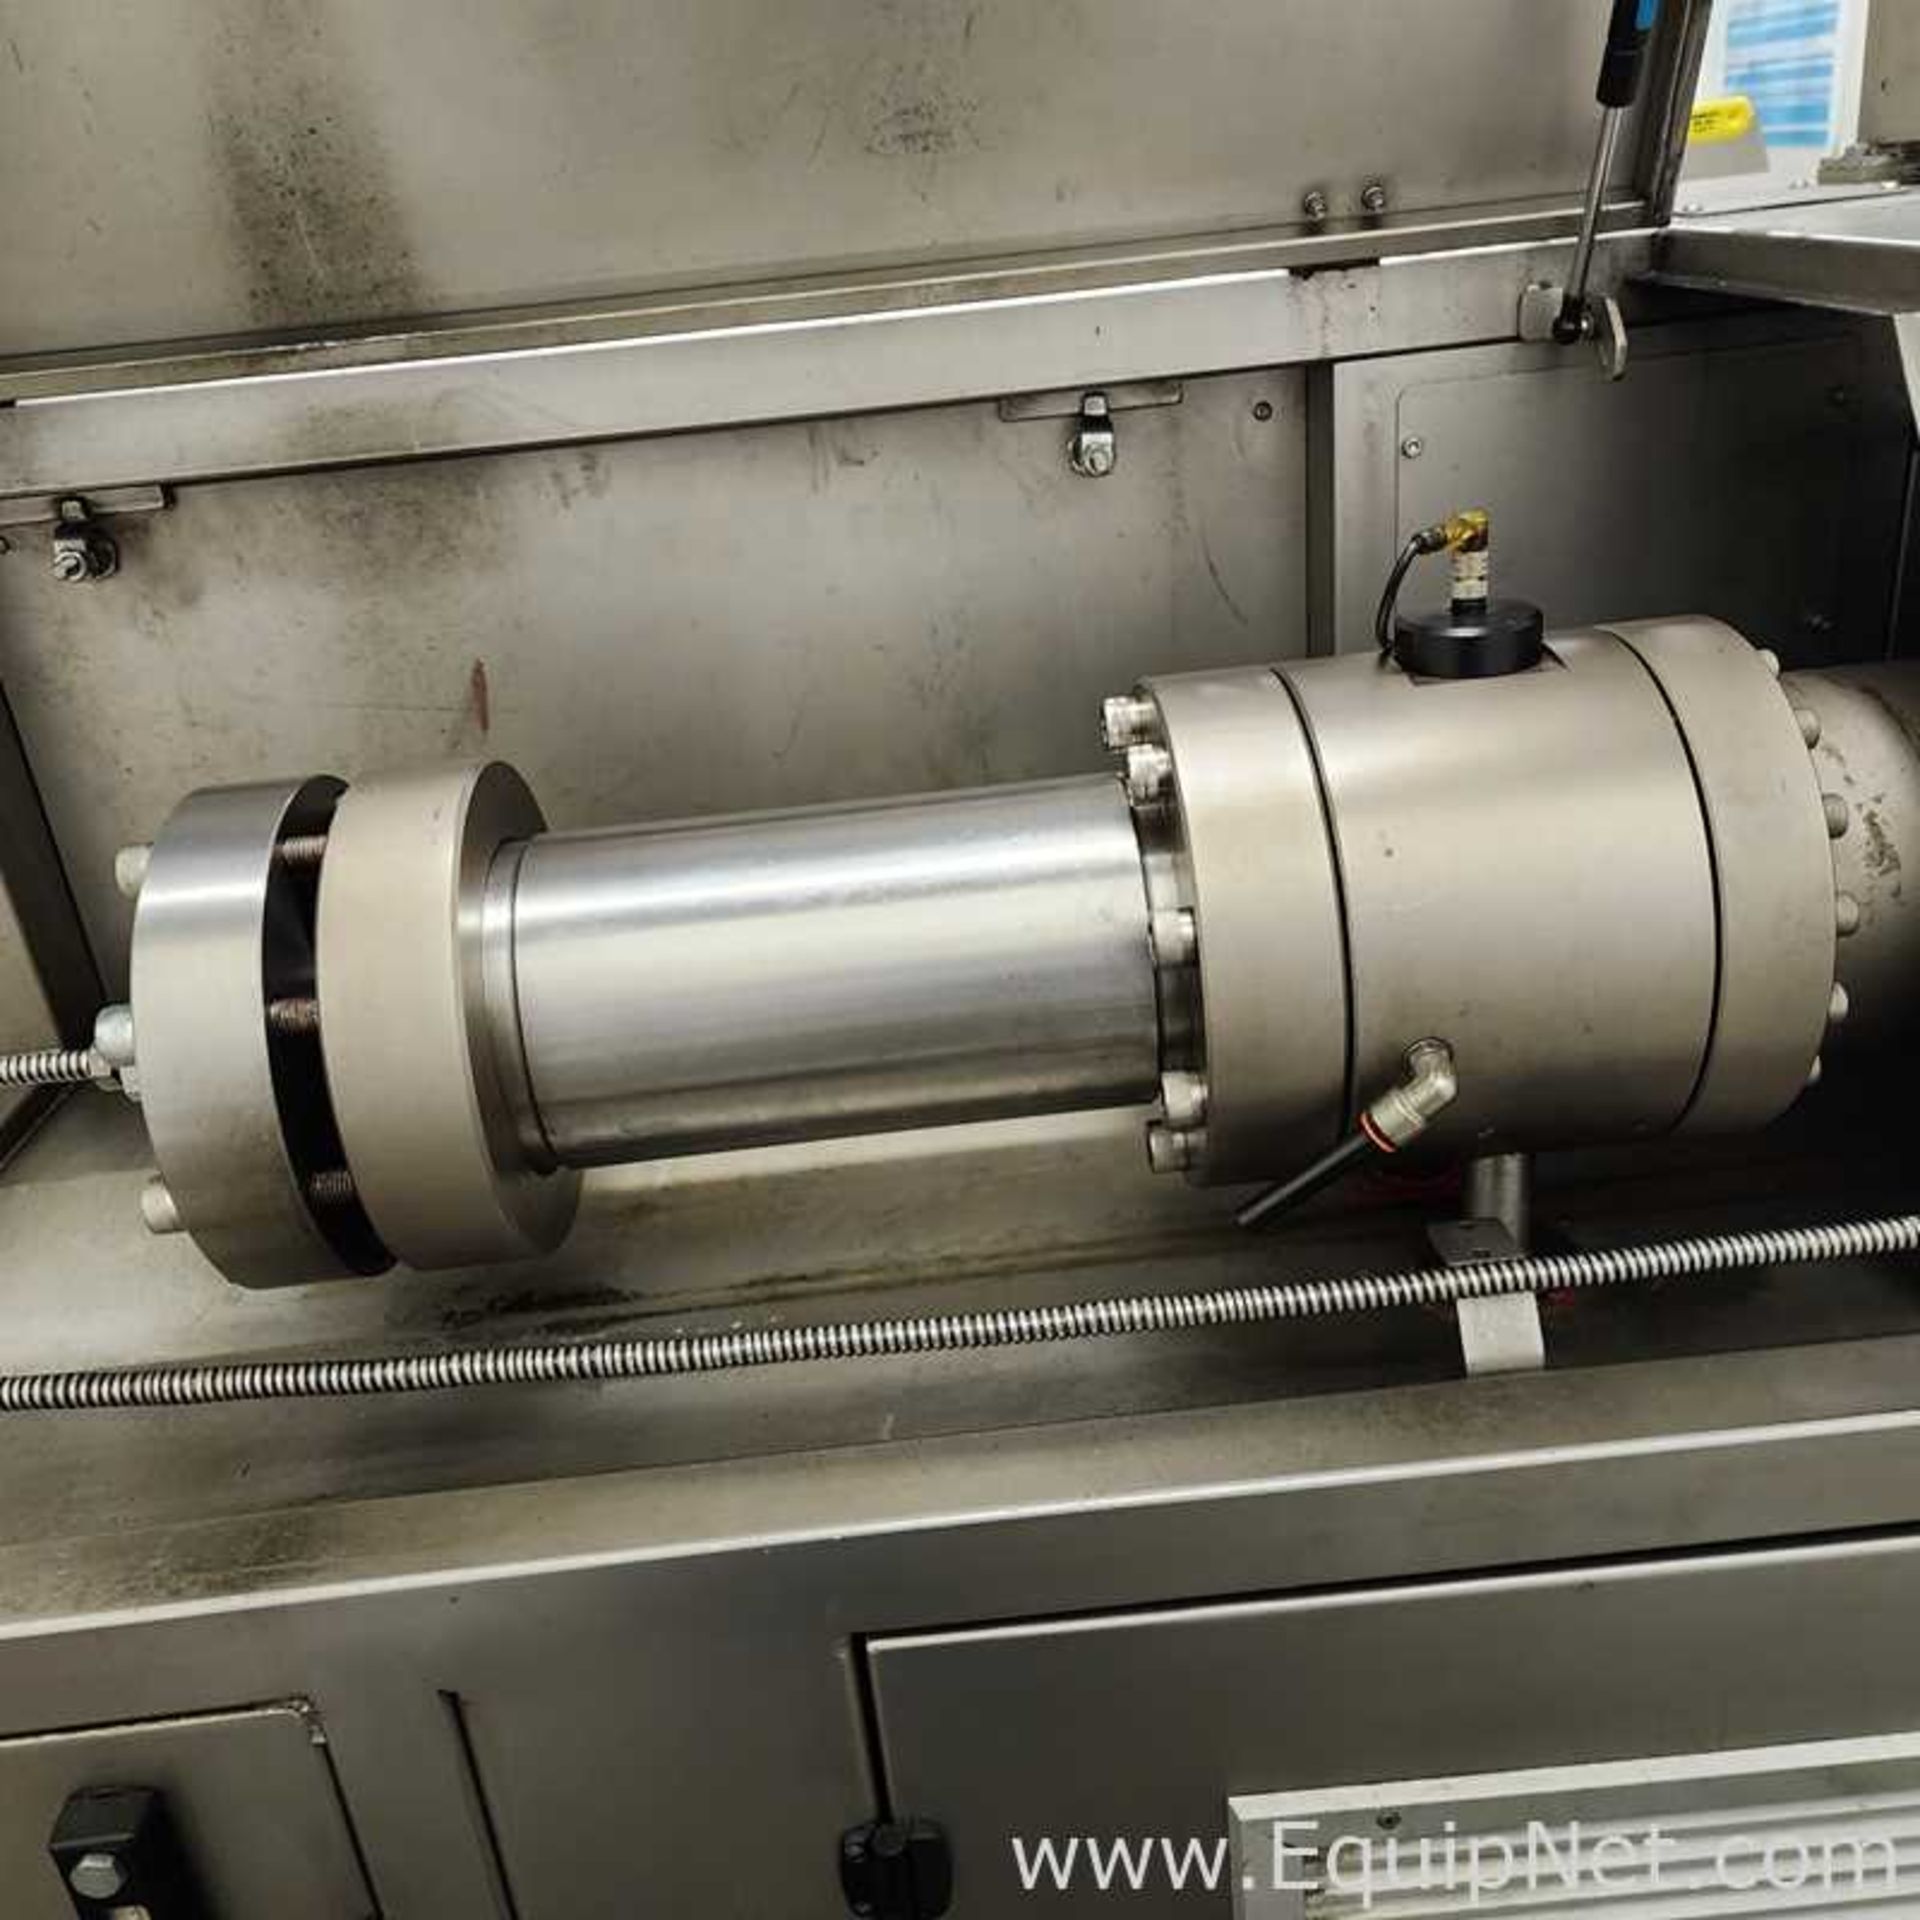 Desmasa S.L INT DMB Pair Of Ultra High Pressure Intensifier Pumps For Water Jet Machine - Image 4 of 7